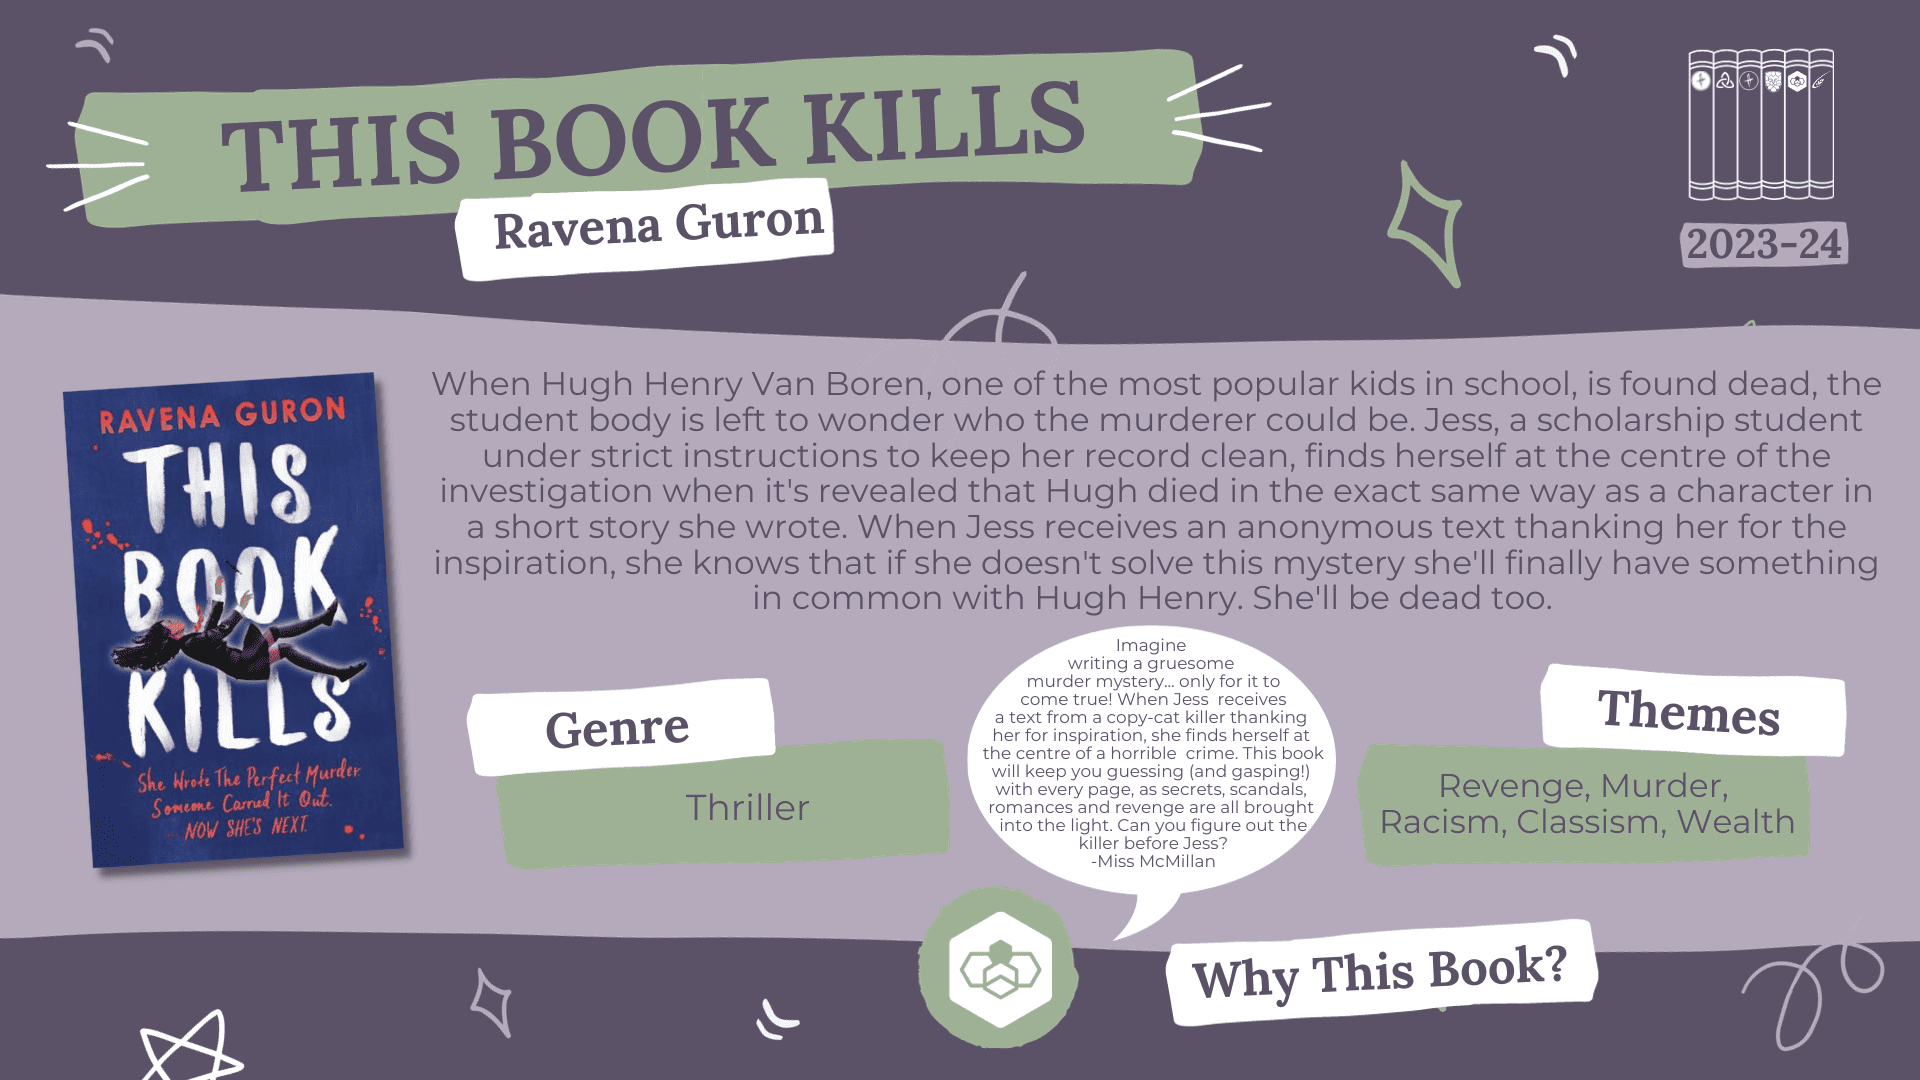  A fact card about a book nominated for the Laurus Trust Libraries Book Award 2023-2024: This Book Kills by Ravena Guron Blurb reads: When Hugh Henry Van Boren, one of the most popular kids in school, is found dead, the student body is left to wonder who the murderer could be. Jess, a scholarship student under strict instructions to keep her record clean, finds herself at the centre of the investigation when it's revealed that Hugh died in the exact same way as a character in a short story she wrote. When Jess receives an anonymous text thanking her for the inspiration, she knows that if she doesn't solve this mystery she'll finally have something in common with Hugh Henry. She'll be dead too. Genre: Thriller Themes: Revenge, Murder, Racism, Classism, Wealth Why this book? Imagine writing a gruesome murder mystery... only for it to come true! When Jess receives a text from a copy-cat killer thanking her for inspiration, she finds herself at the centre of a horrible crime. This book will keep you guessing (and gasping!) with every page, as secrets, scandals, romances and revenge are all brought into the light. Can you figure out the killer before Jess? - Miss McMillan (DHS)